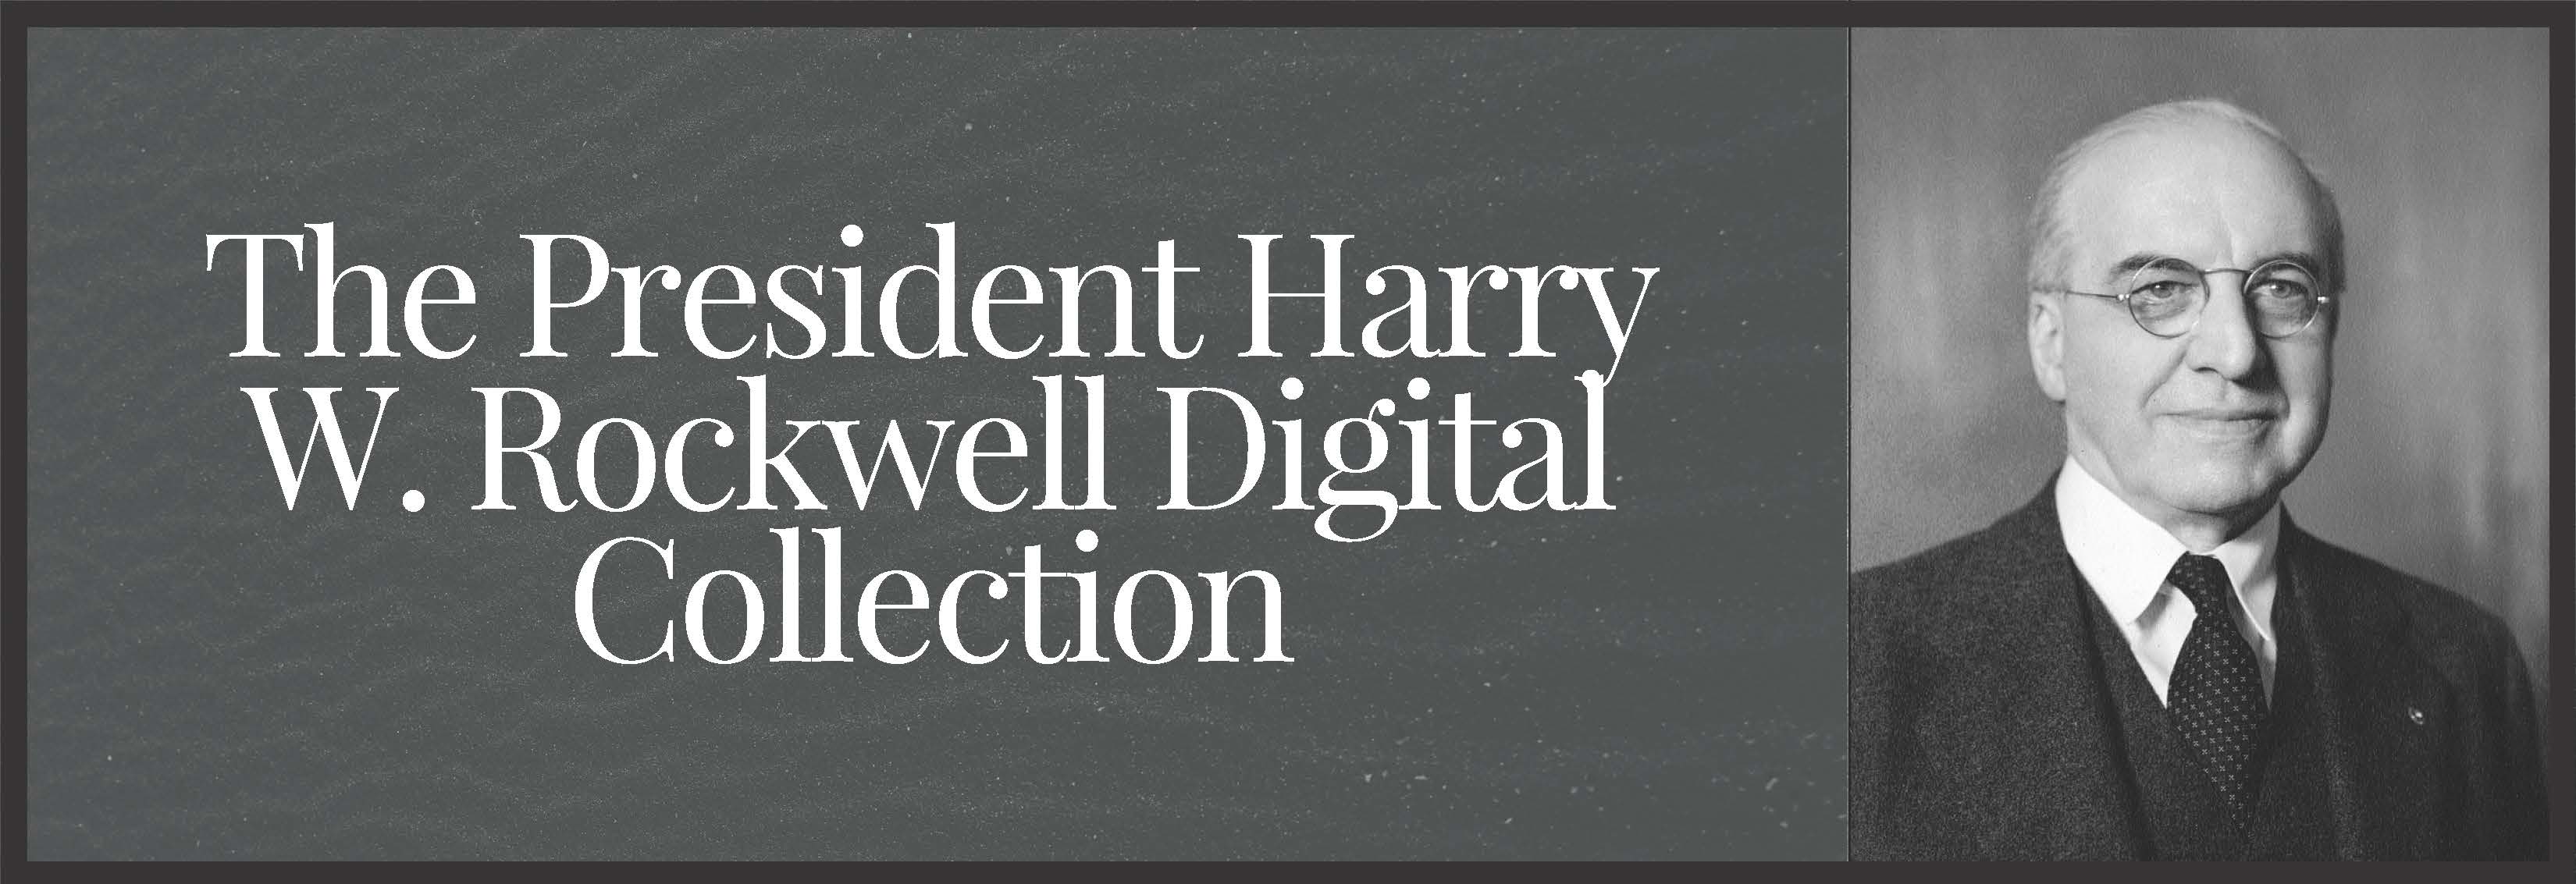 President Harry W. Rockwell Digital Collection